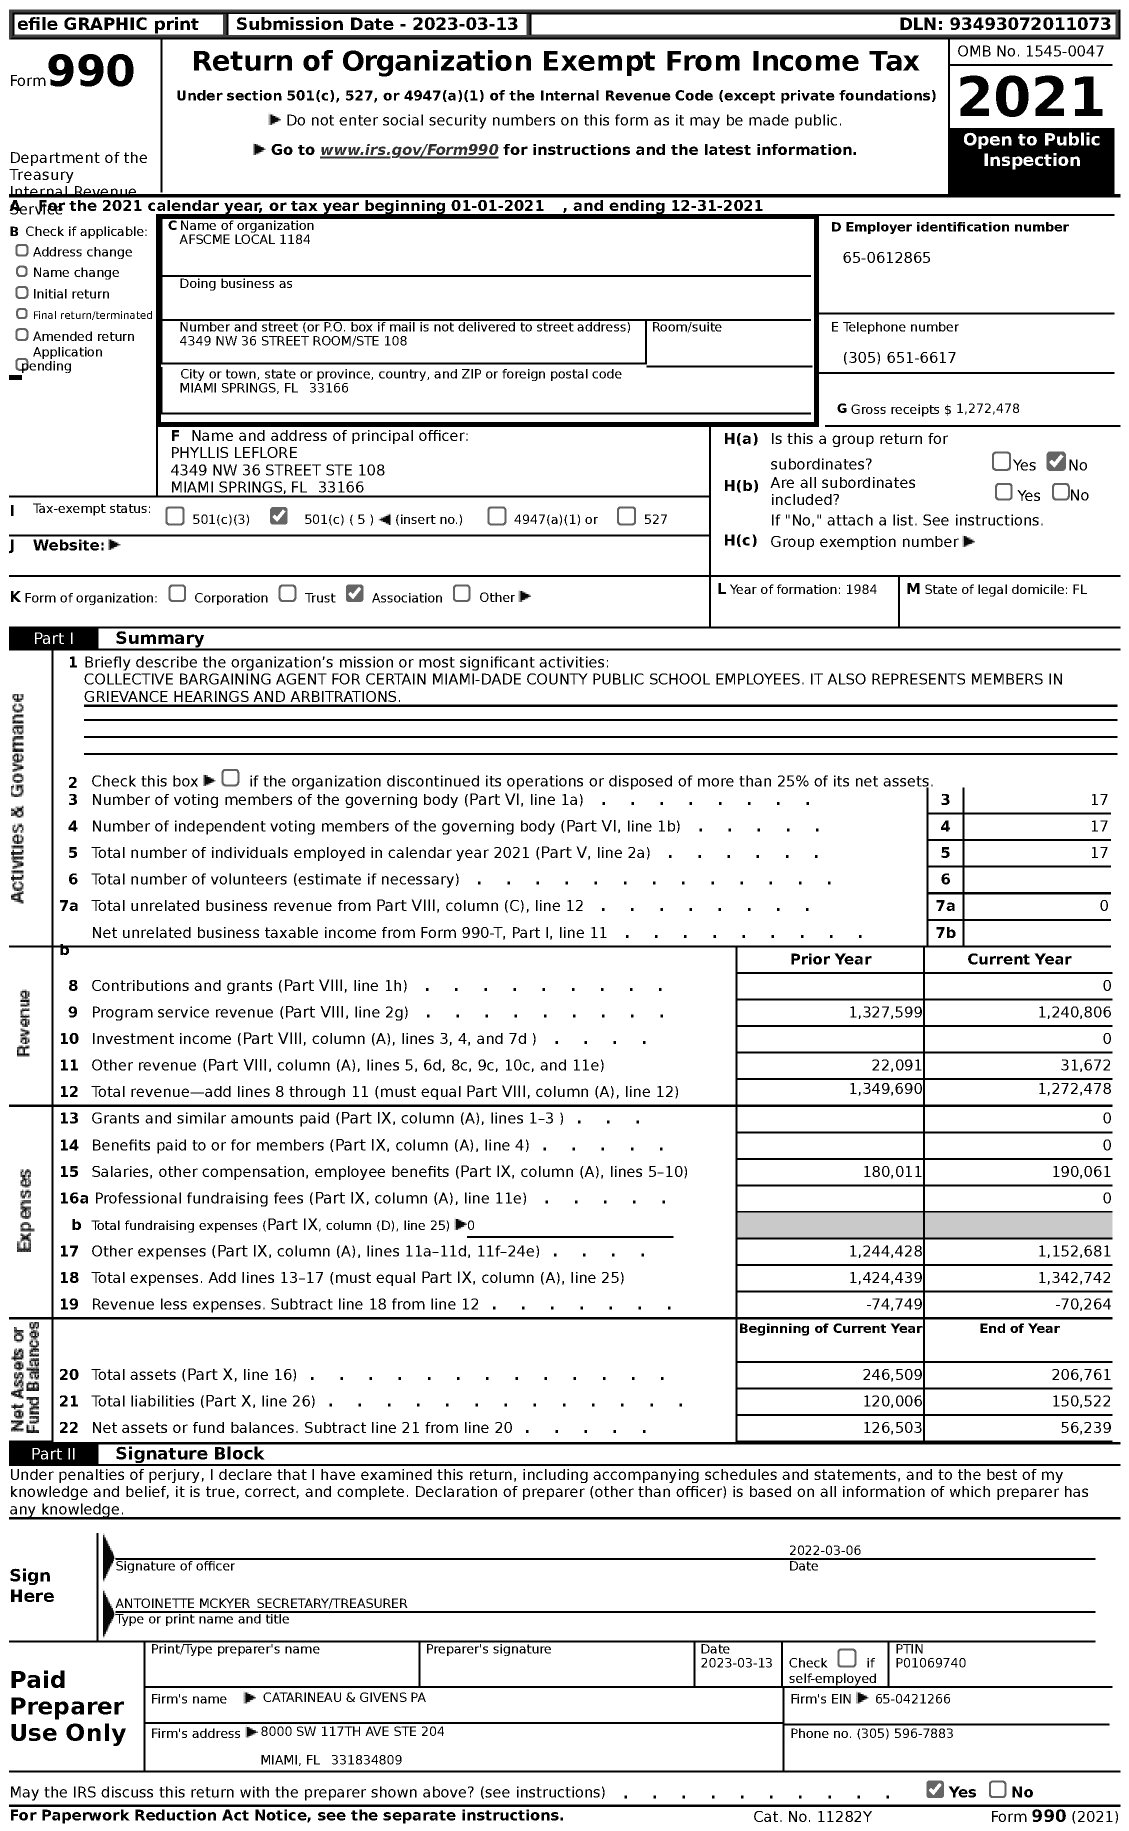 Image of first page of 2021 Form 990 for American Federation of State County & Municipal Employees - L1184FL Dade Co Fla School BD Emps